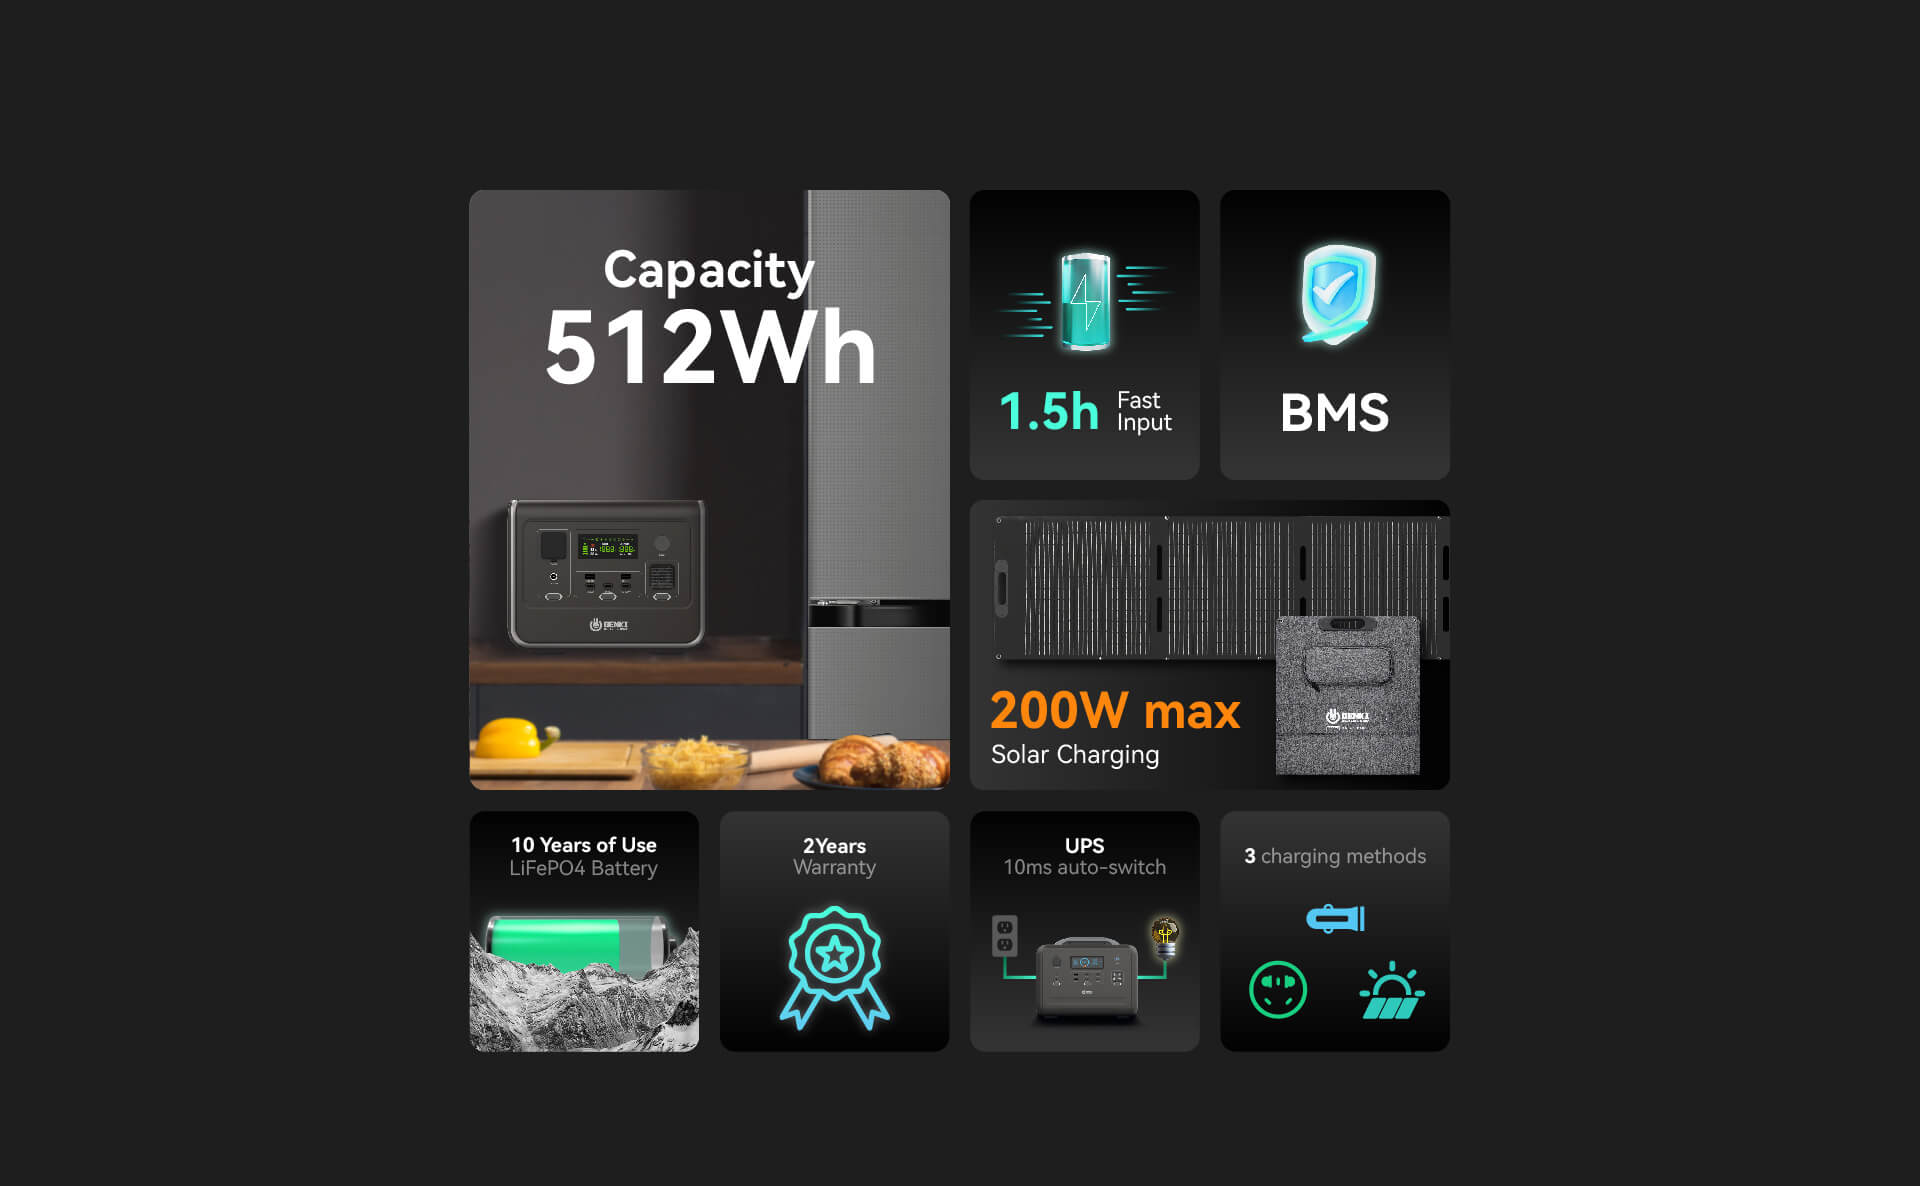 512Wh battery storage